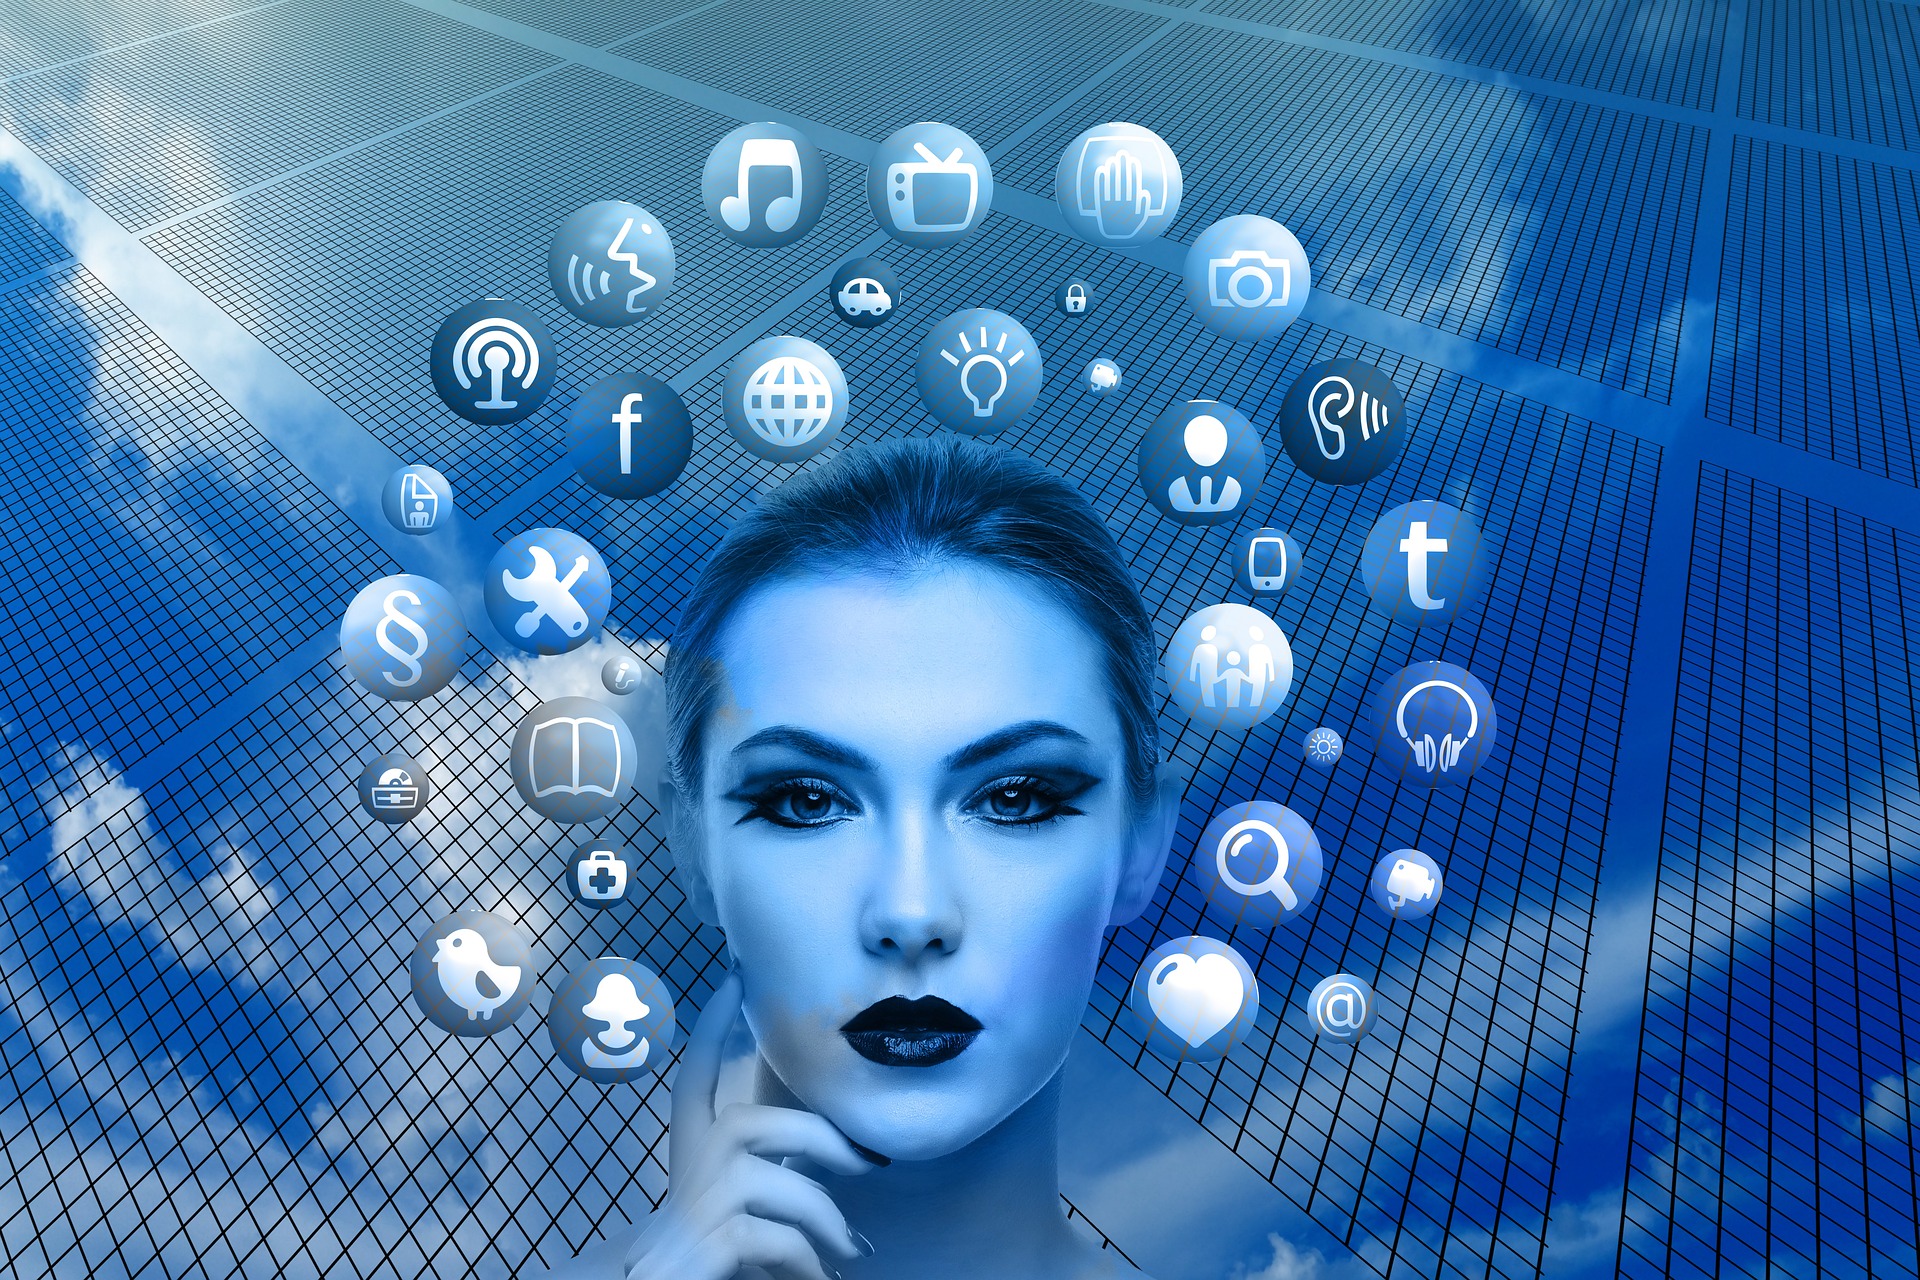 The image shows a feminine head, seemingly in thought, surrounded by social media icons. The image is used under Pixabay License.